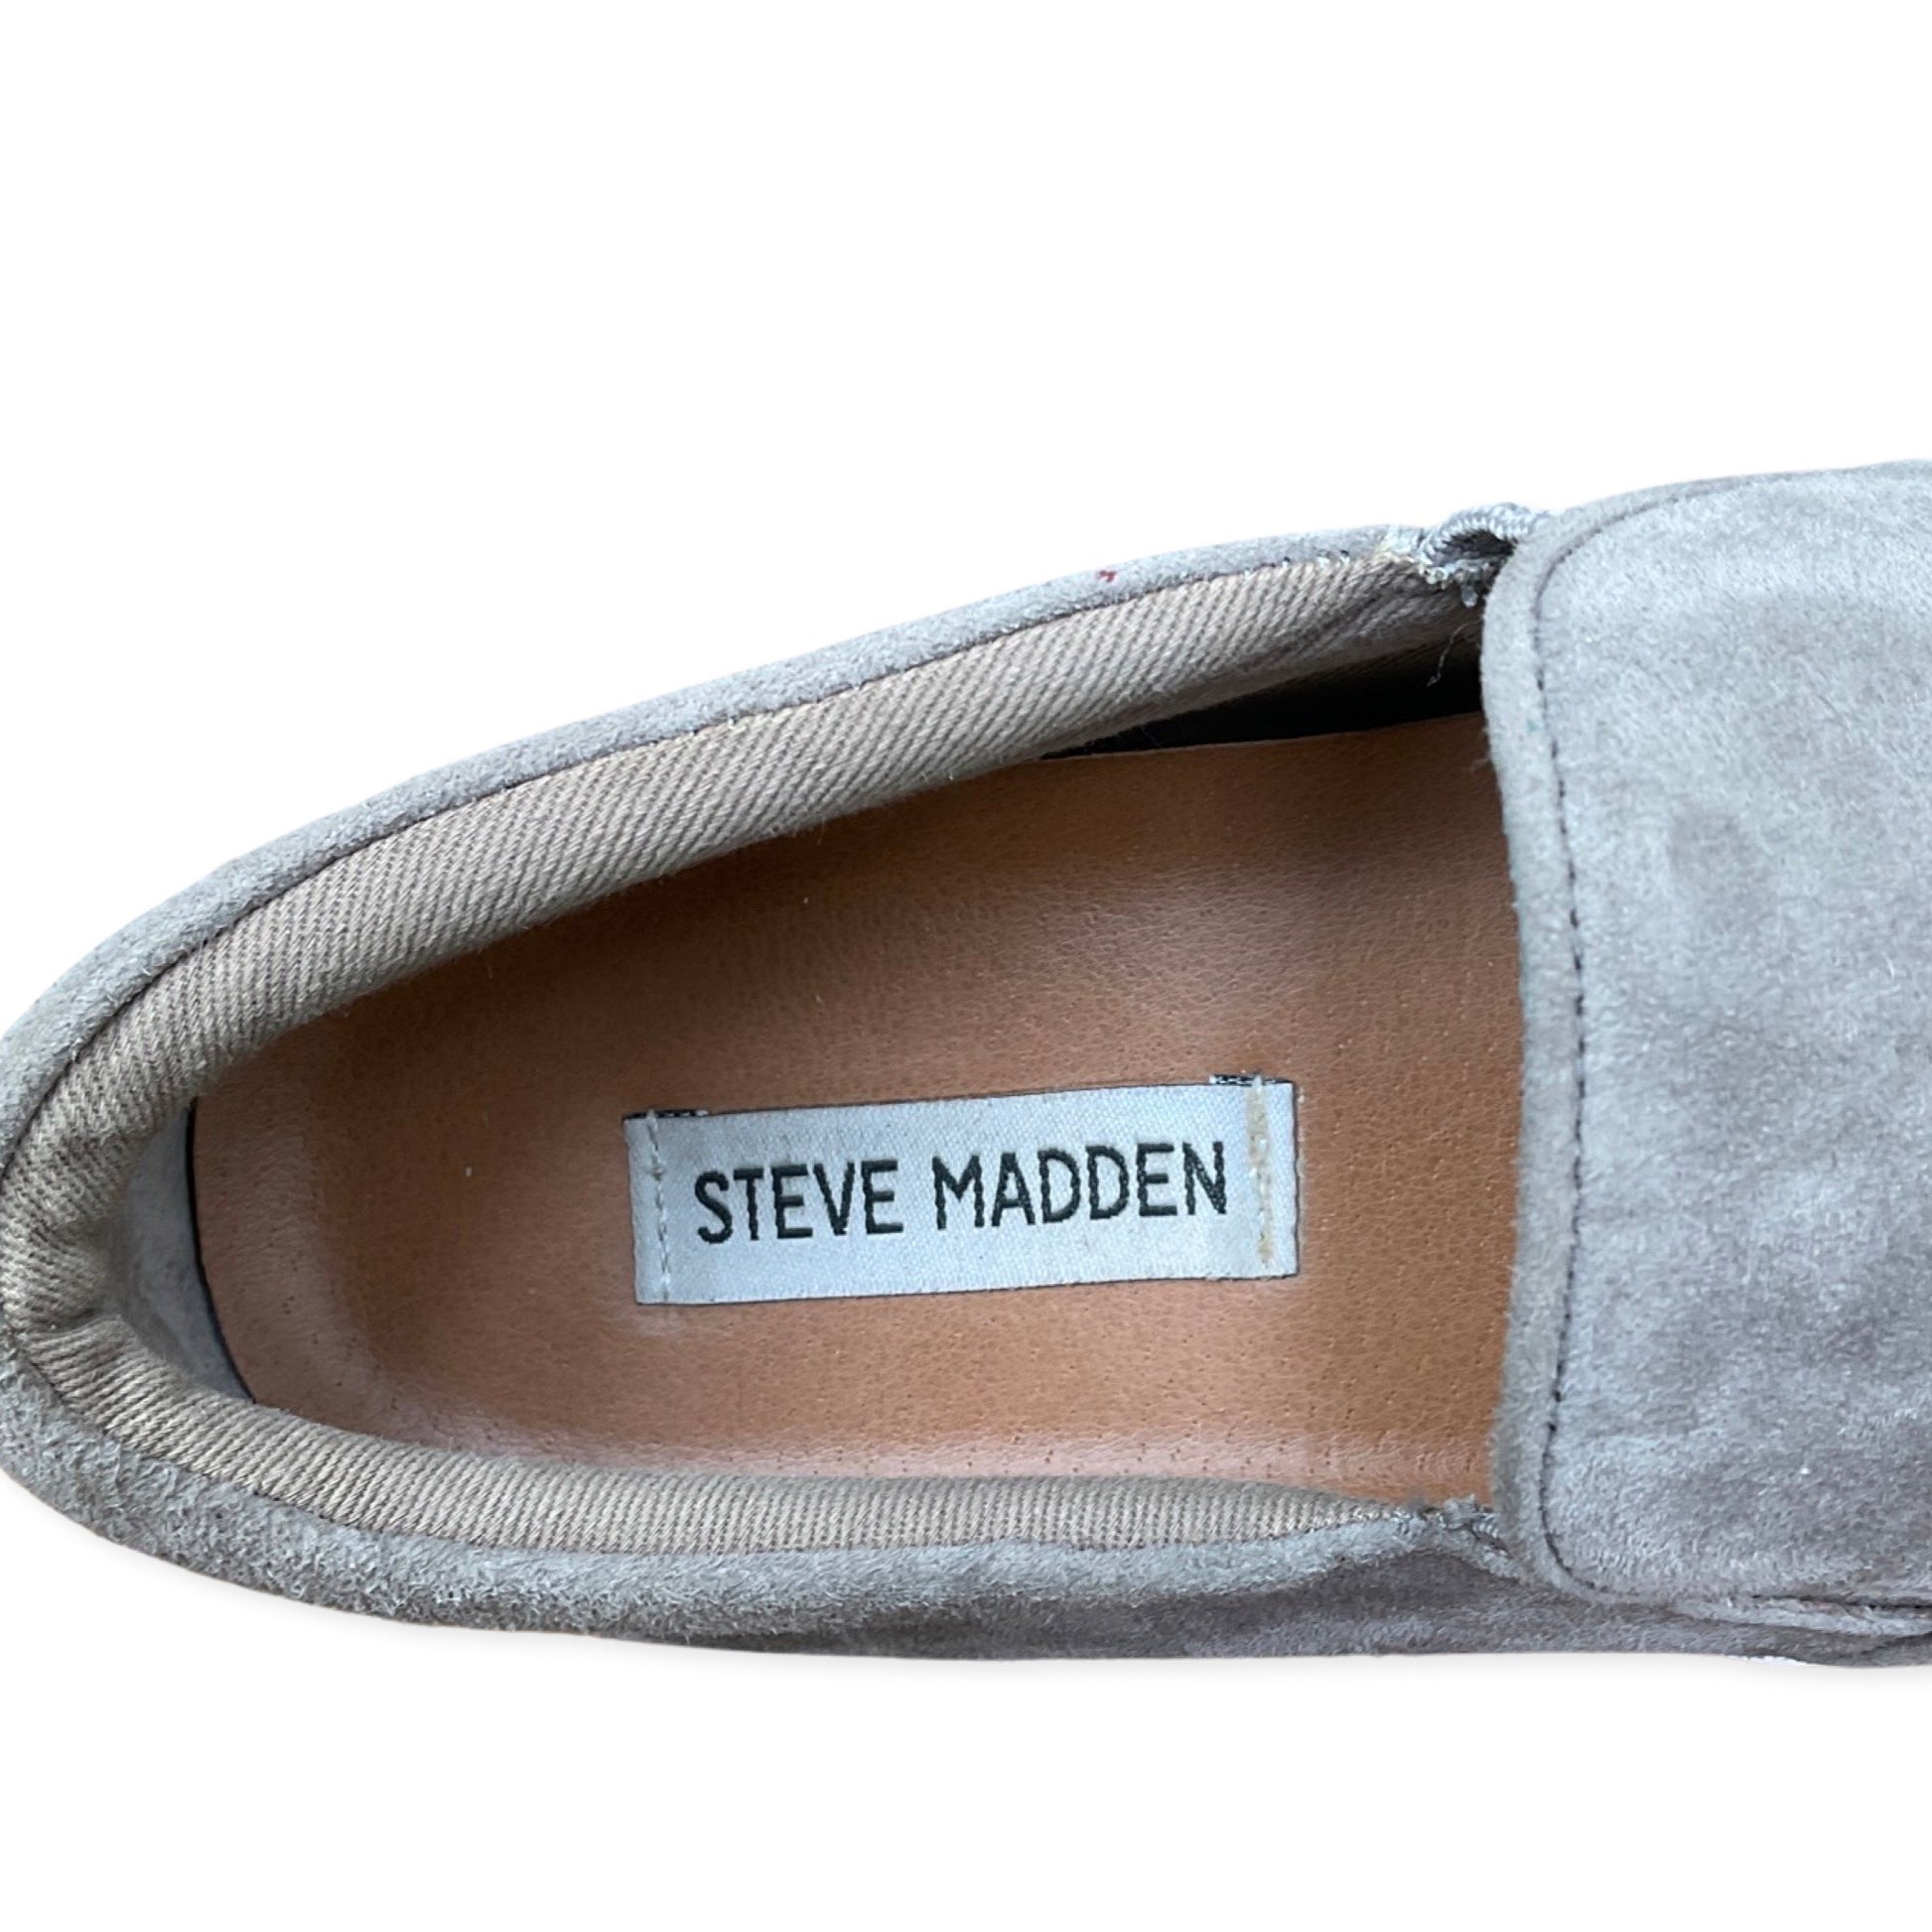 Zapatos Steve Madden Suede Gris - Talla 7,5 The Preloved Shop